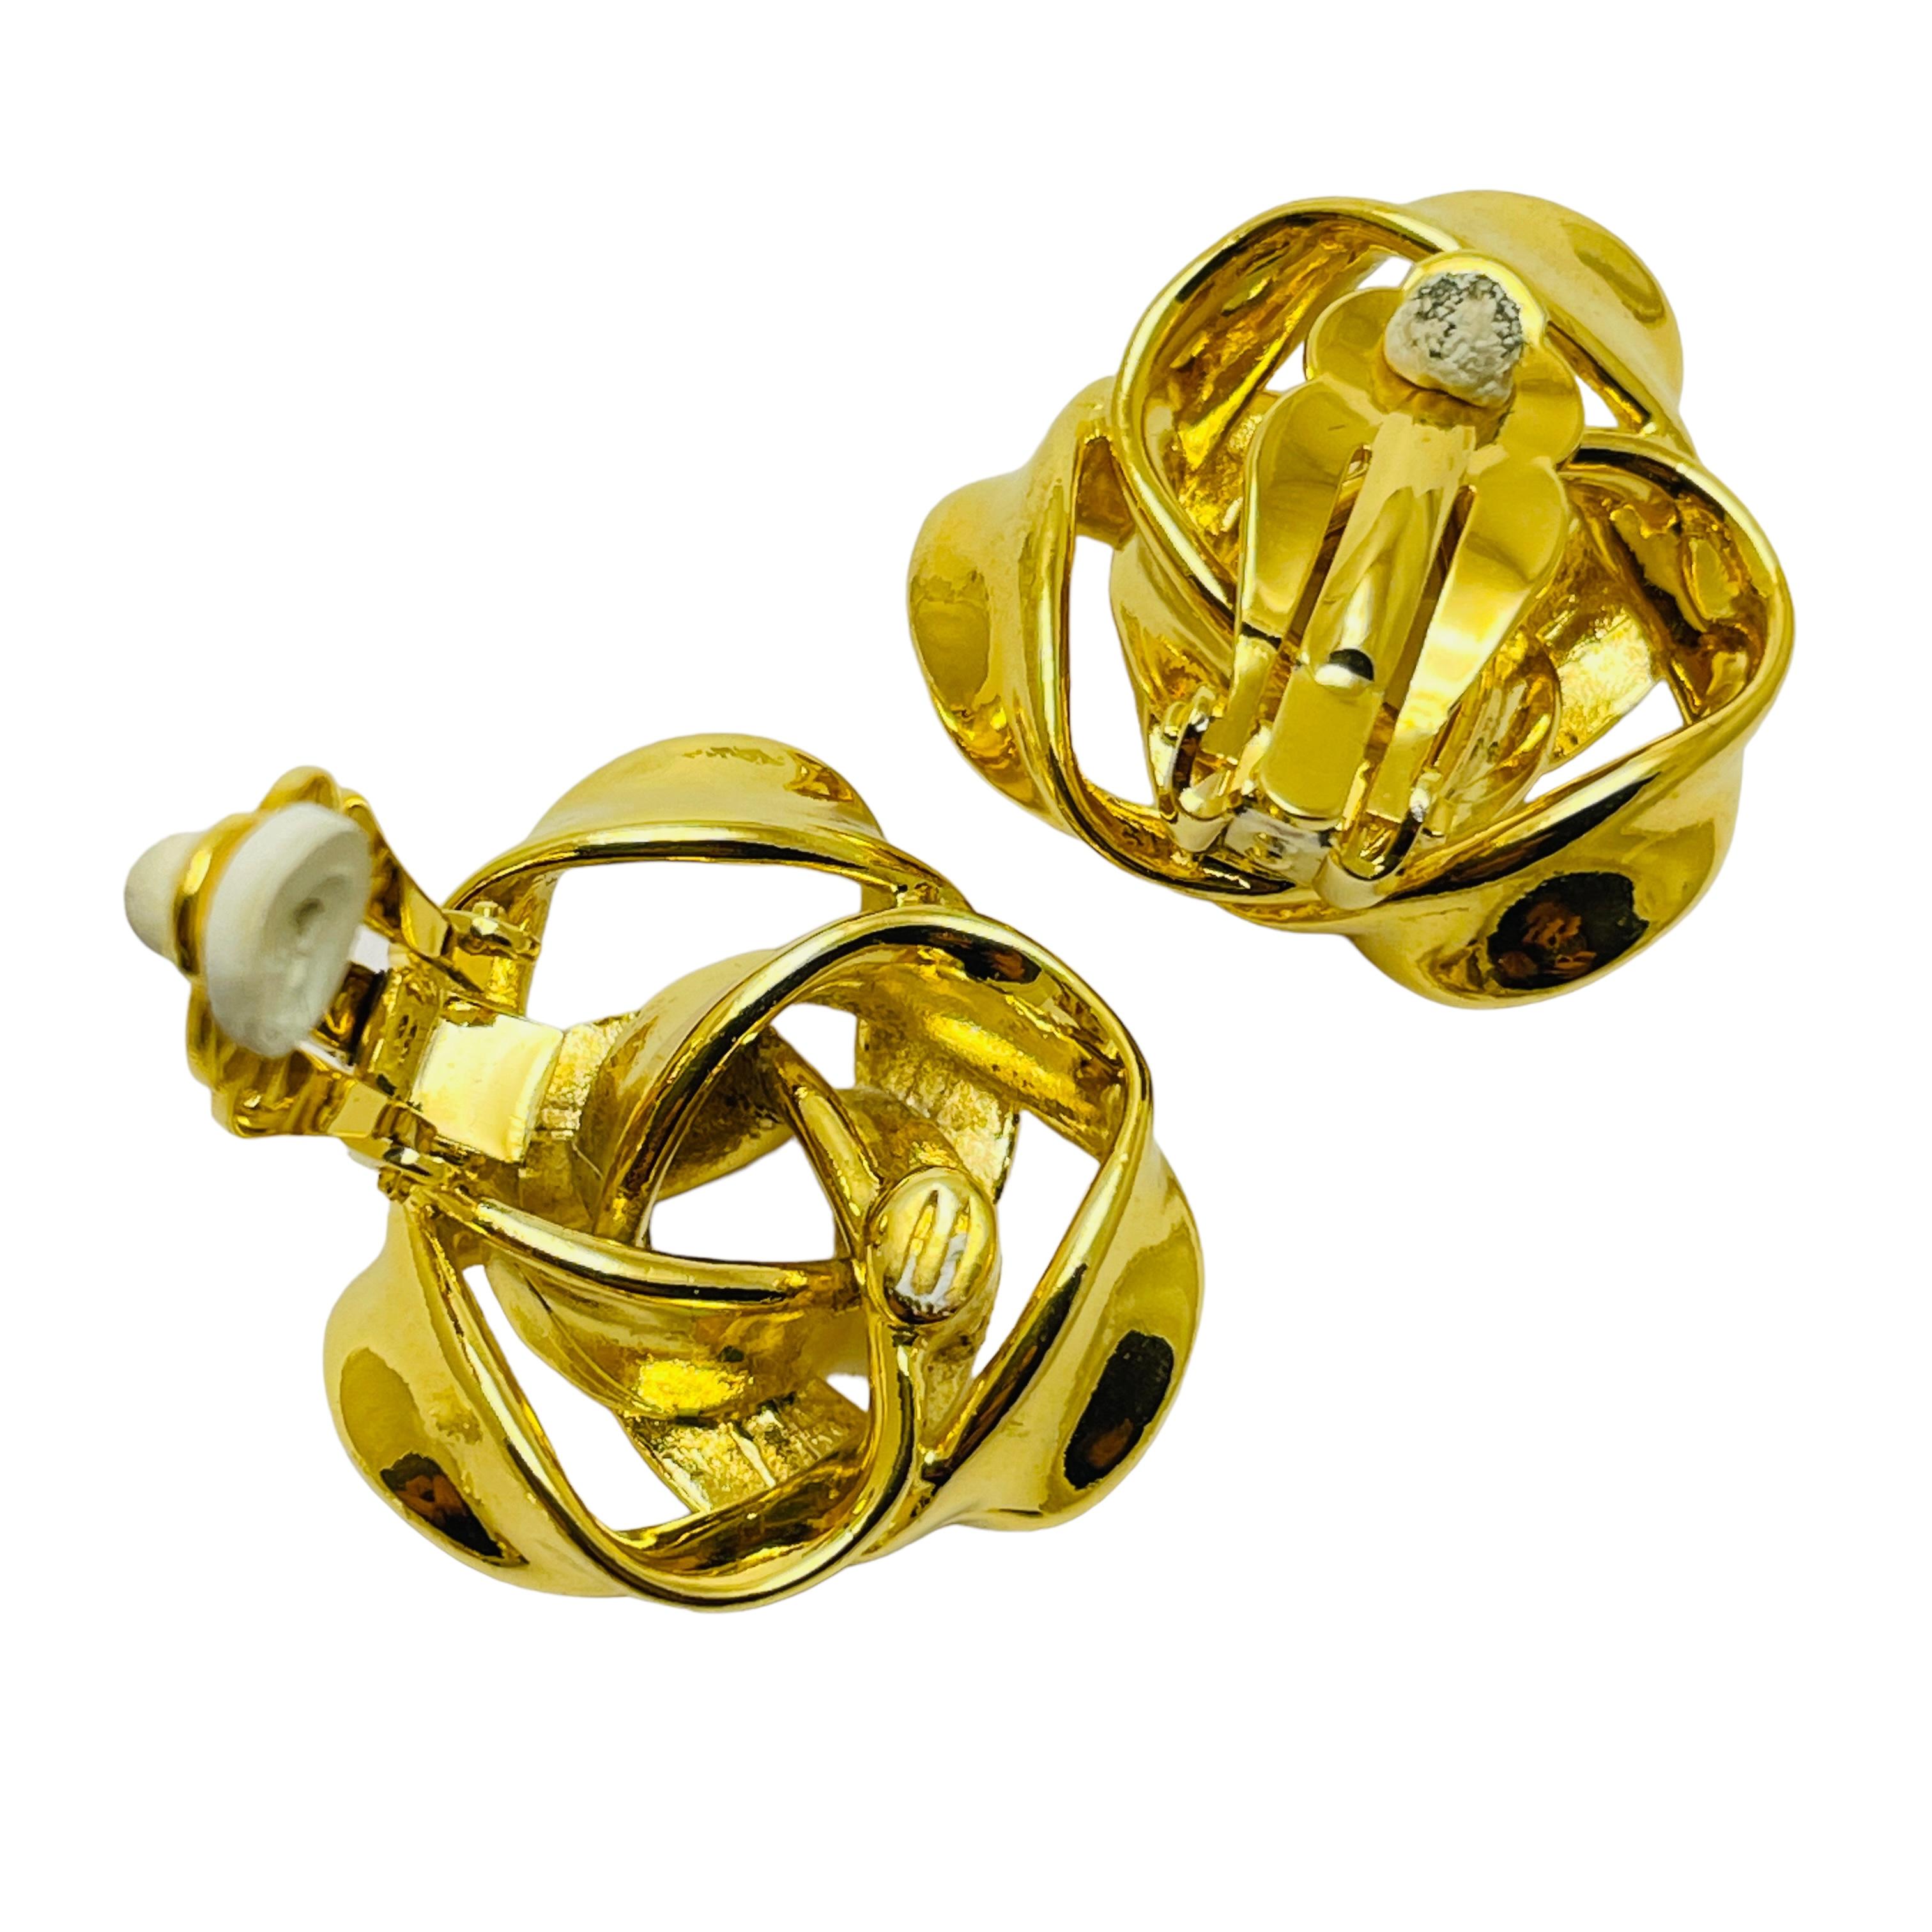 Vintage gold knot designer runway clip on earrings In Good Condition For Sale In Palos Hills, IL